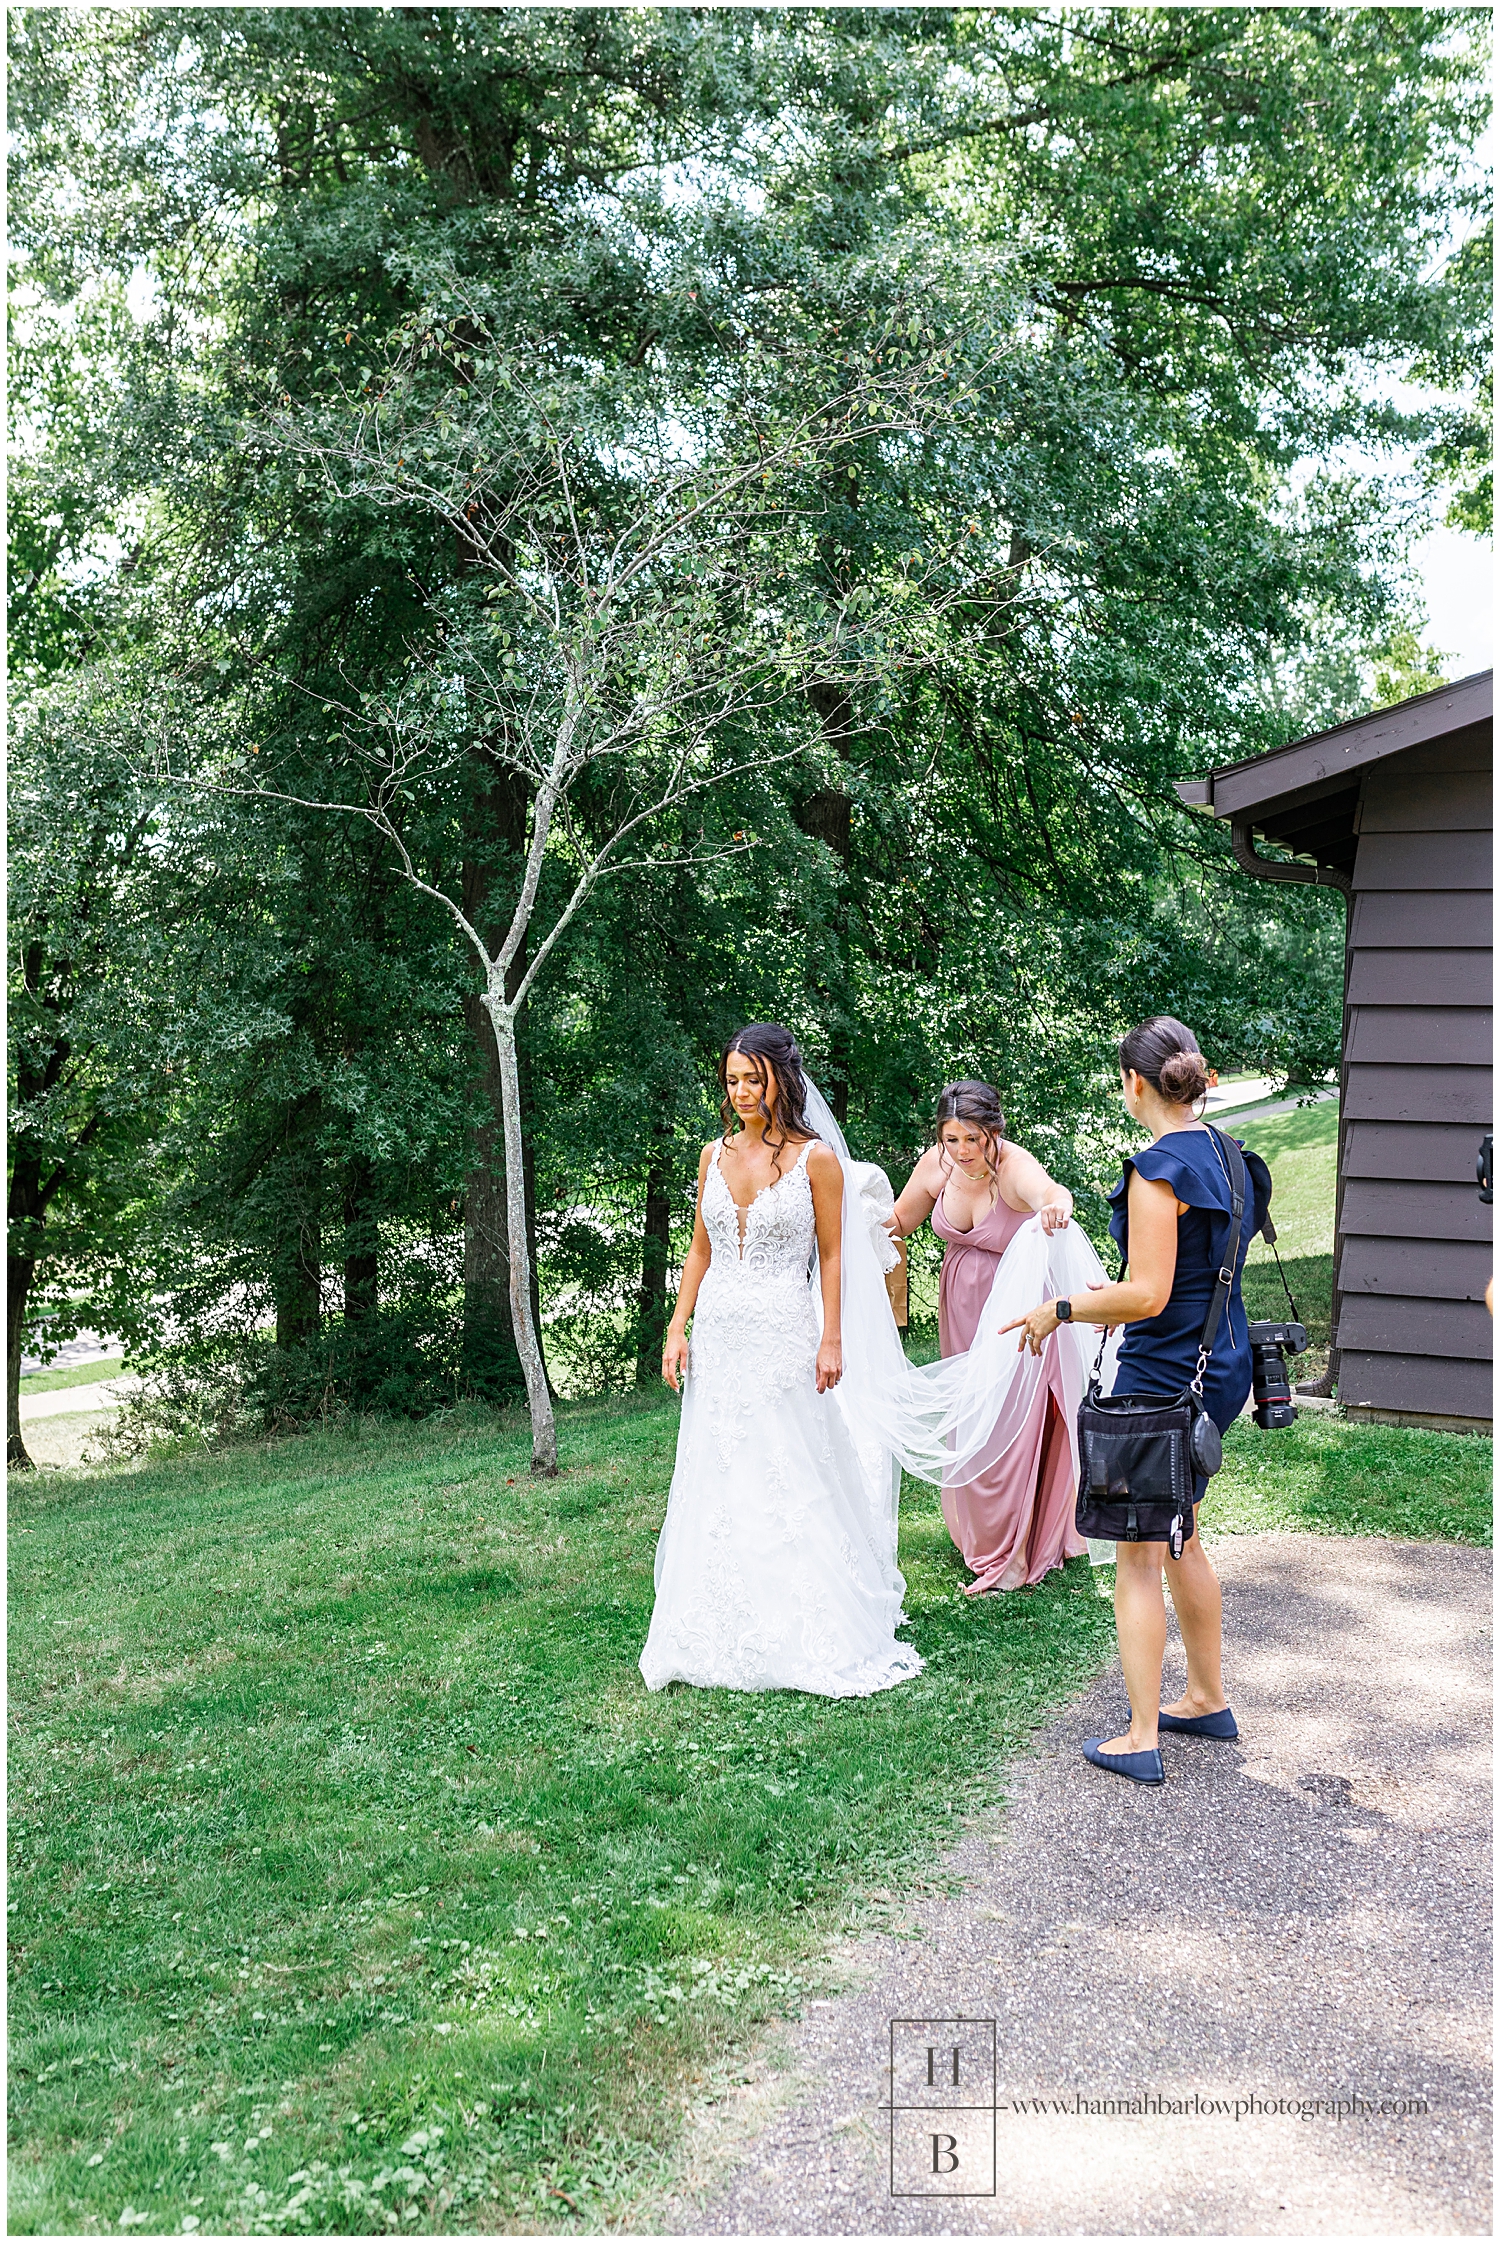 Wedding photographer stands by as bridesmaid arranges bride's train